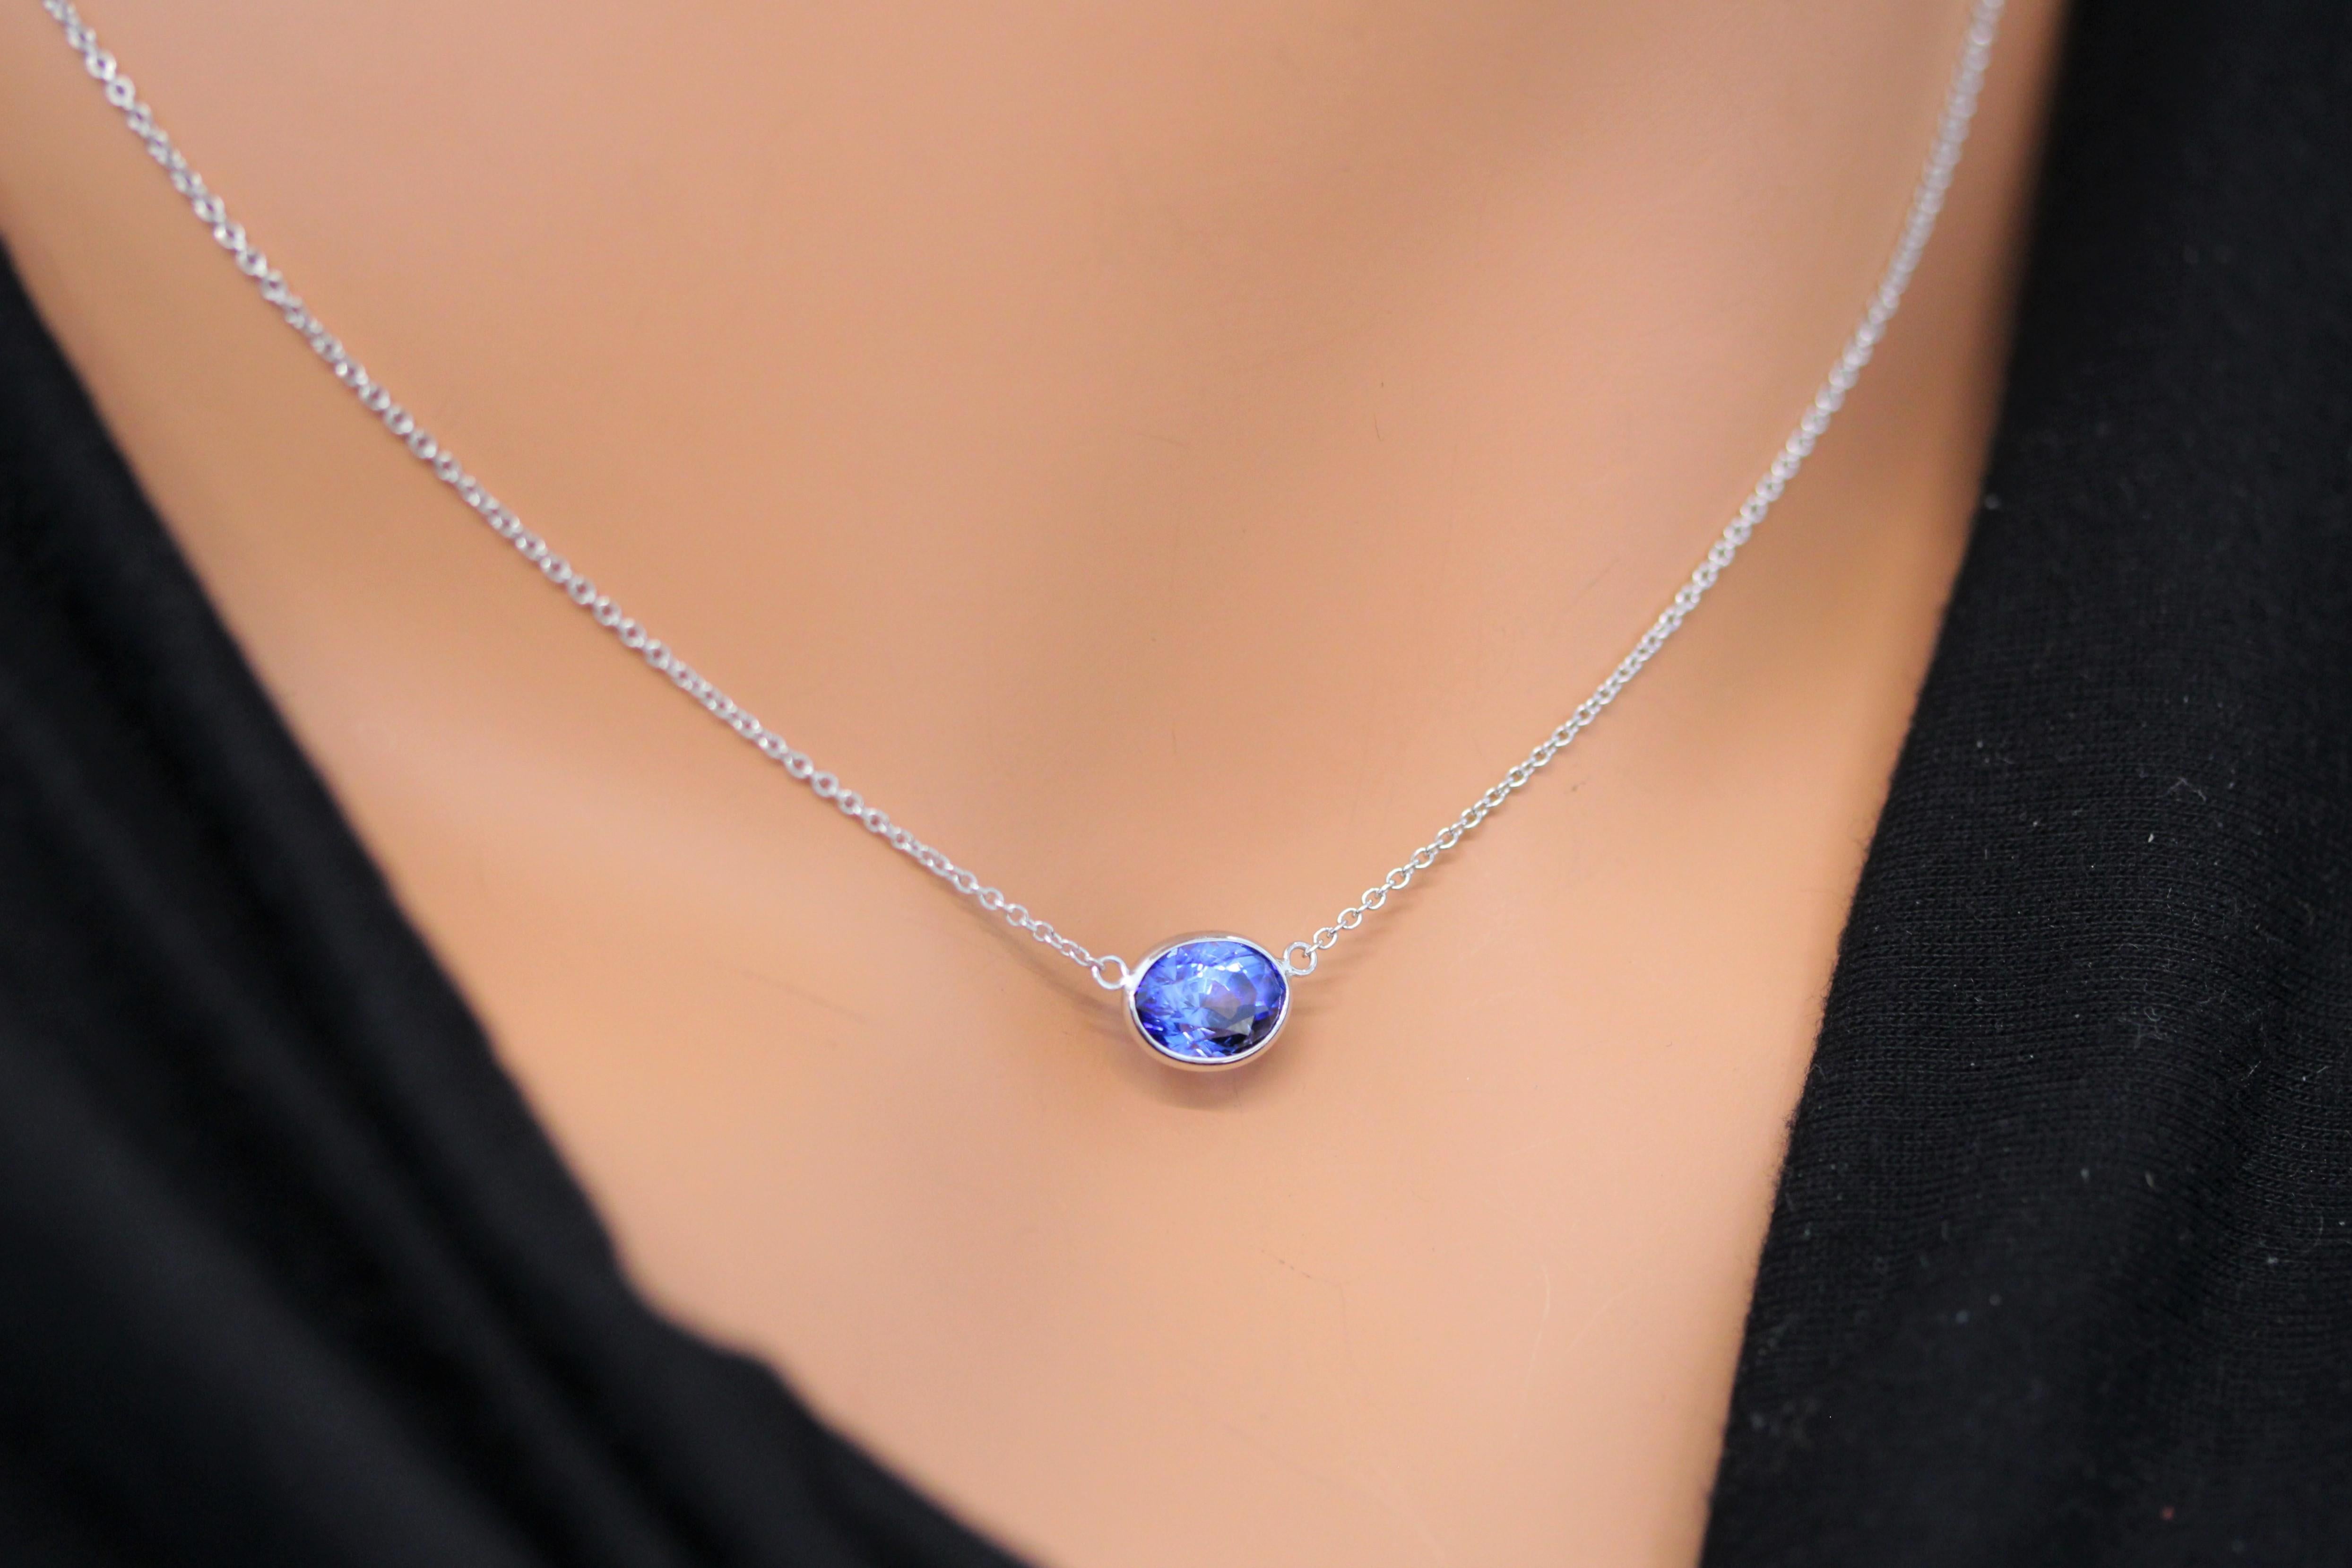 Oval Cut 2.89 Carat Oval Sapphire Blue Fashion Necklaces In 14k White Gold For Sale